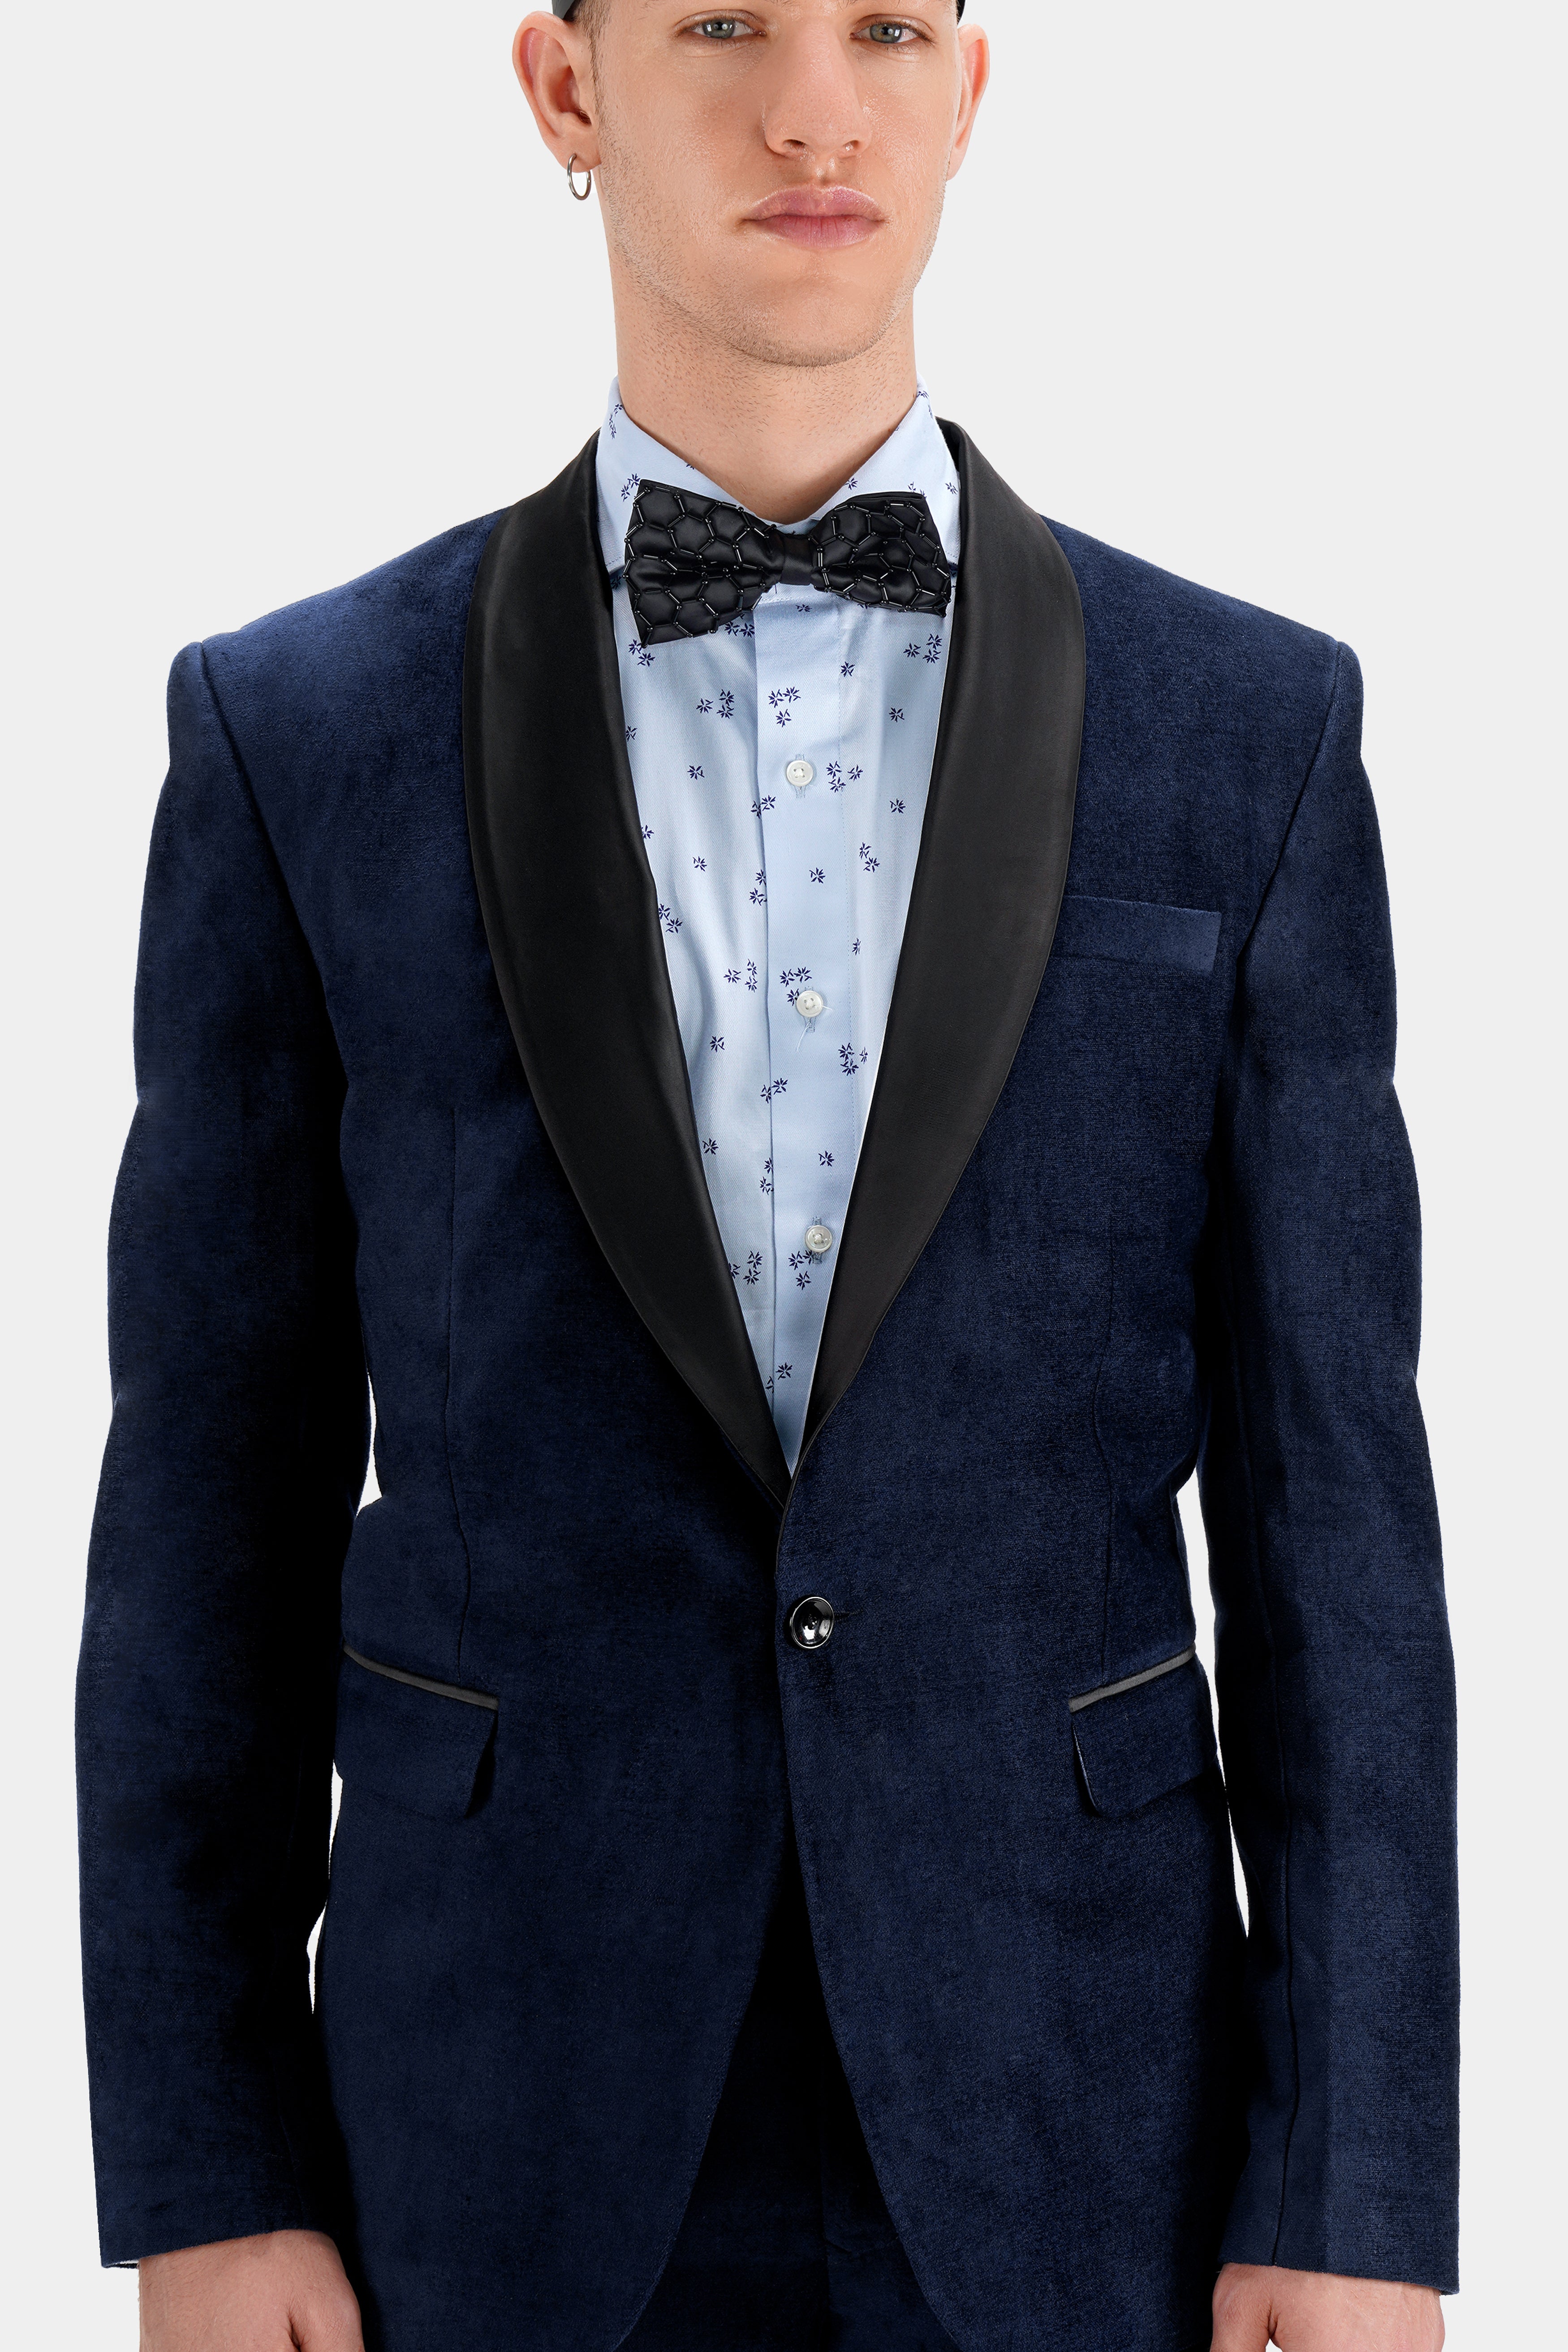 Shop Suits for Men in India - Choose Suit Size, Fabric, Pattern